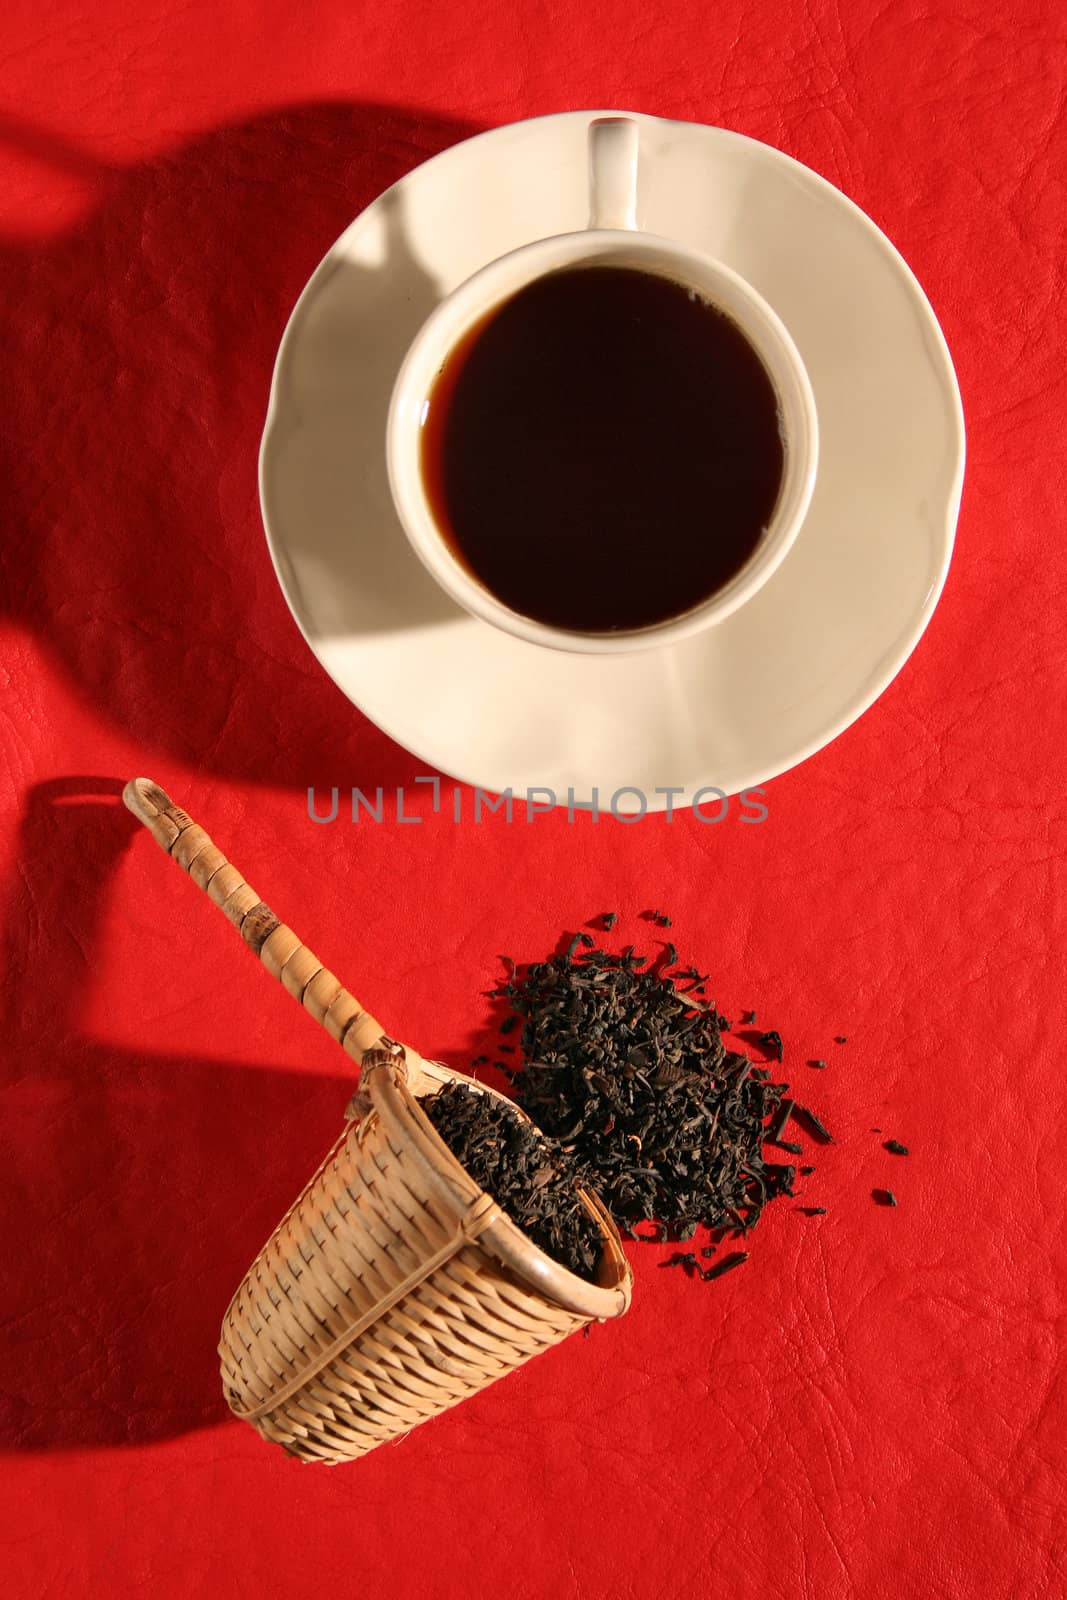 A wicker scoop with herb tea leaves and a cup of tea by Erdosain